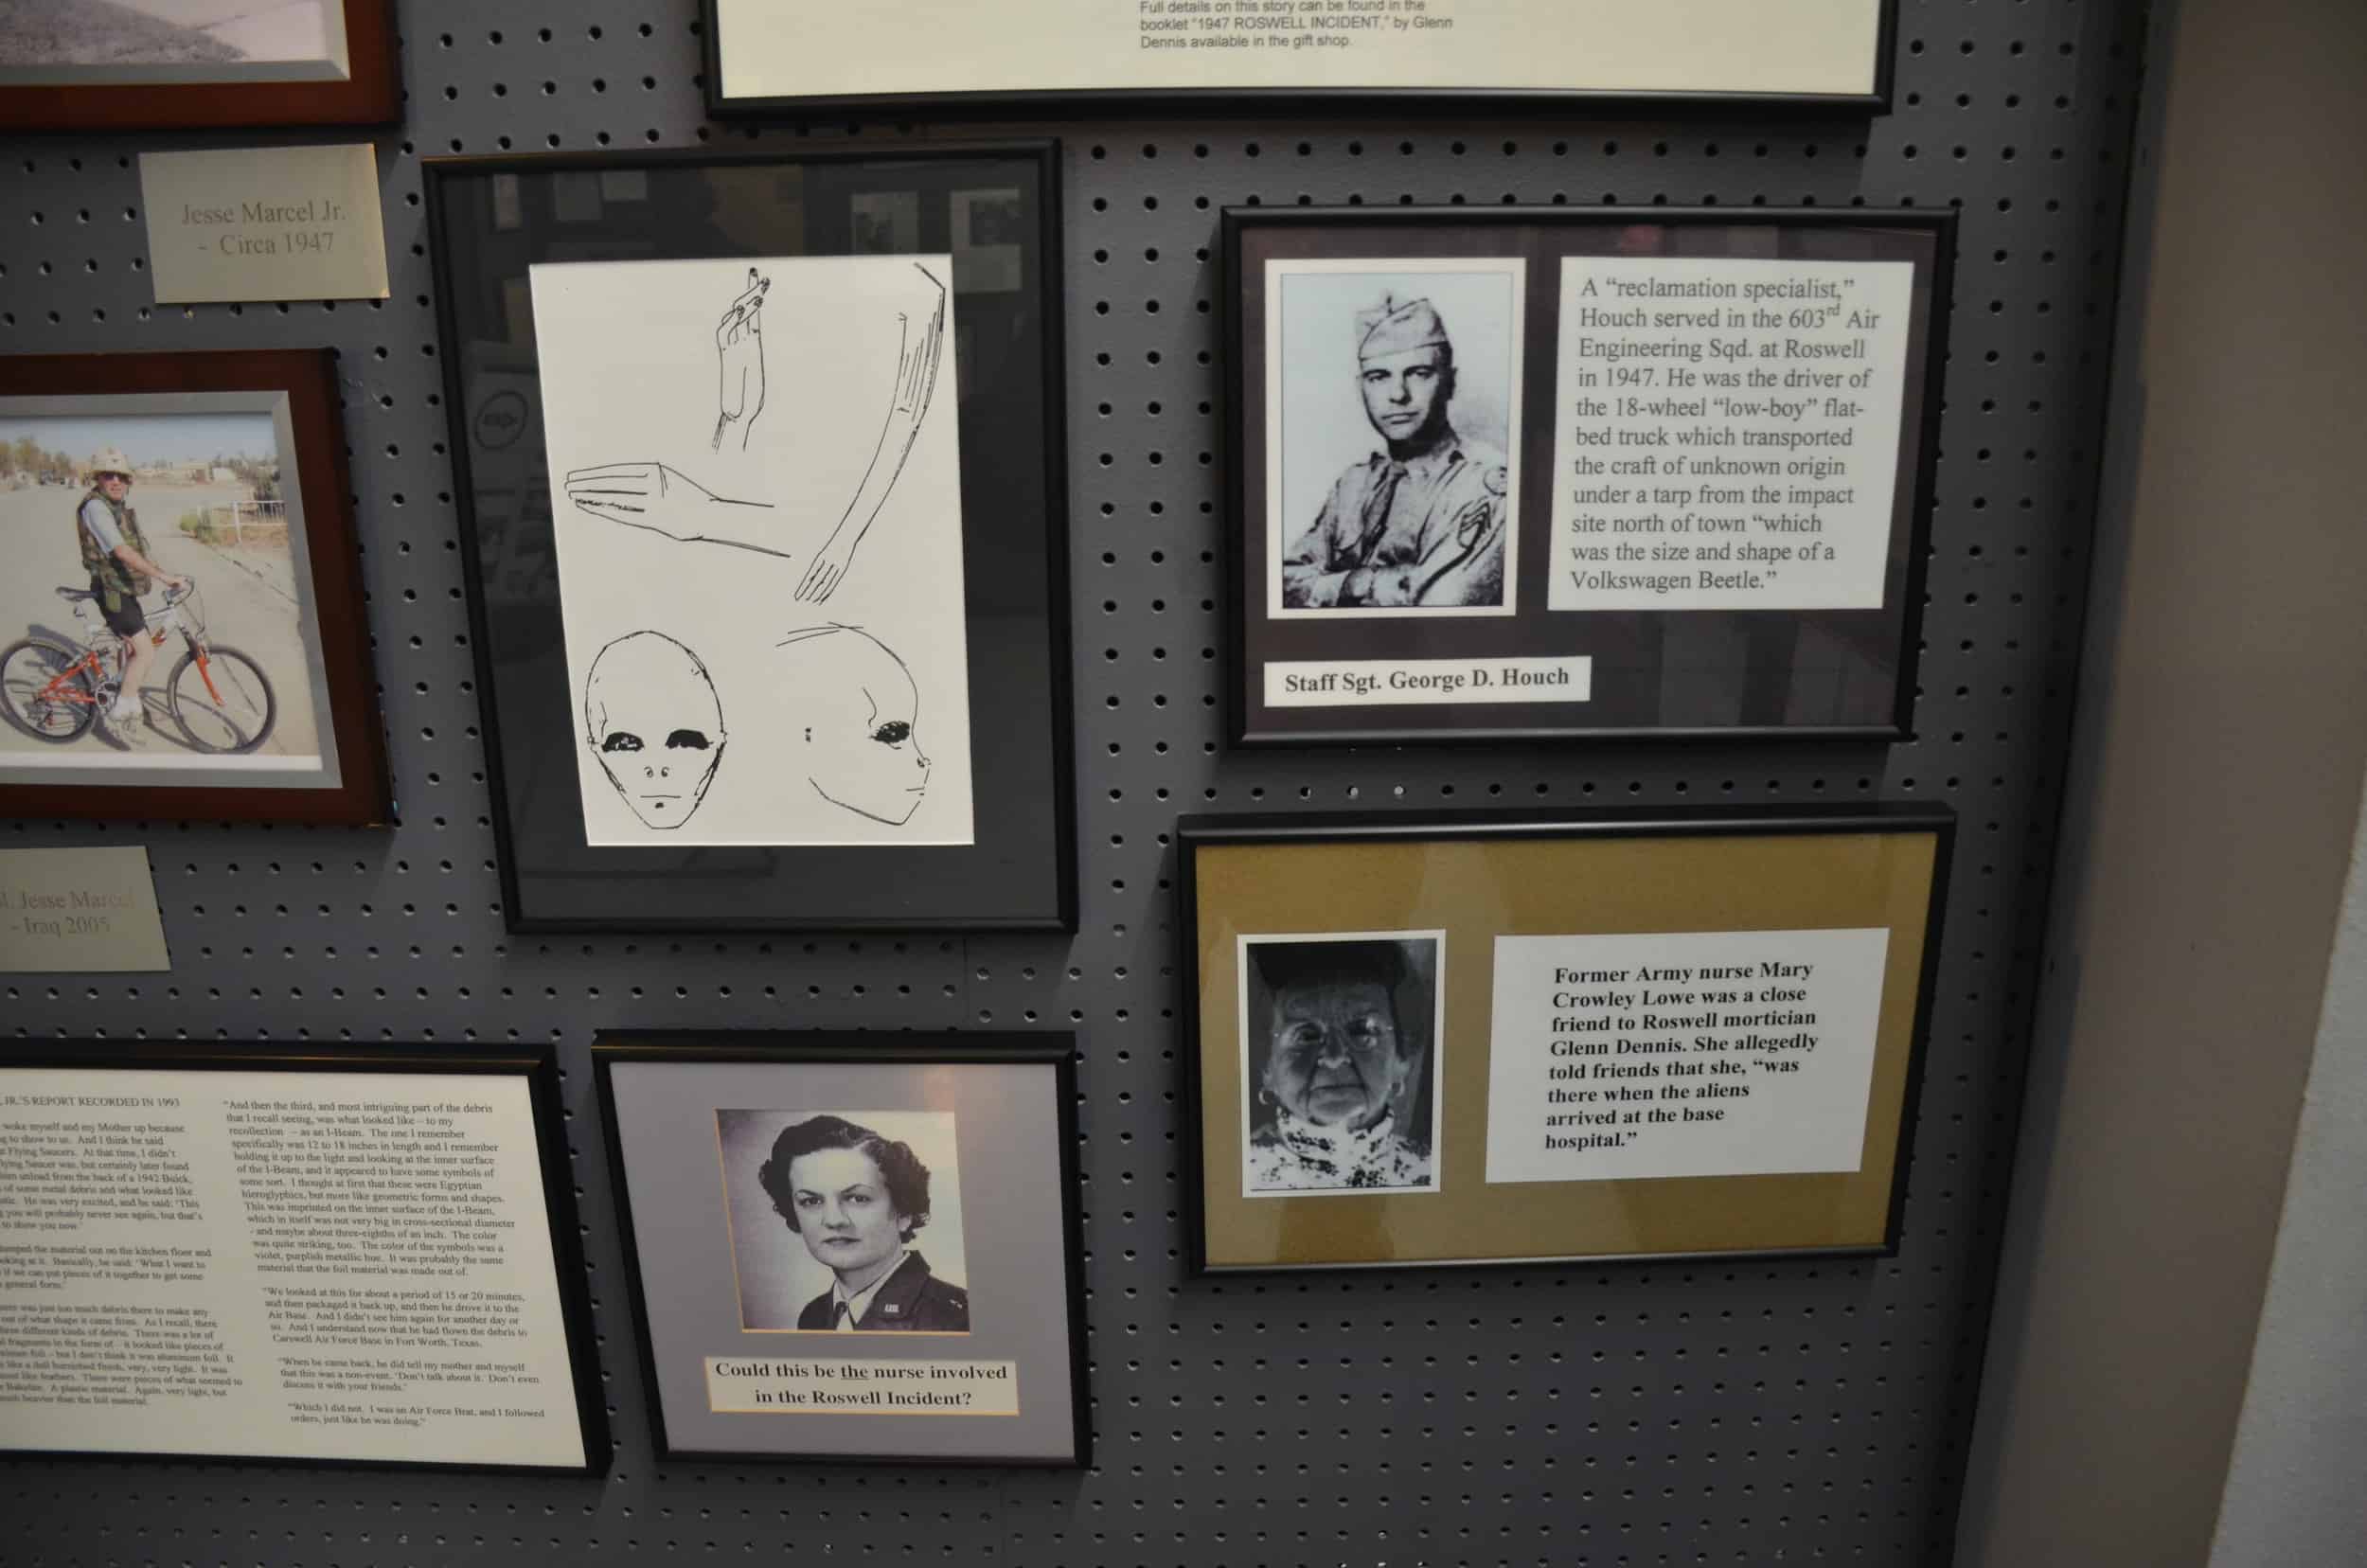 People involved in the Roswell incident at the International UFO Museum and Research Center in Roswell, New Mexico